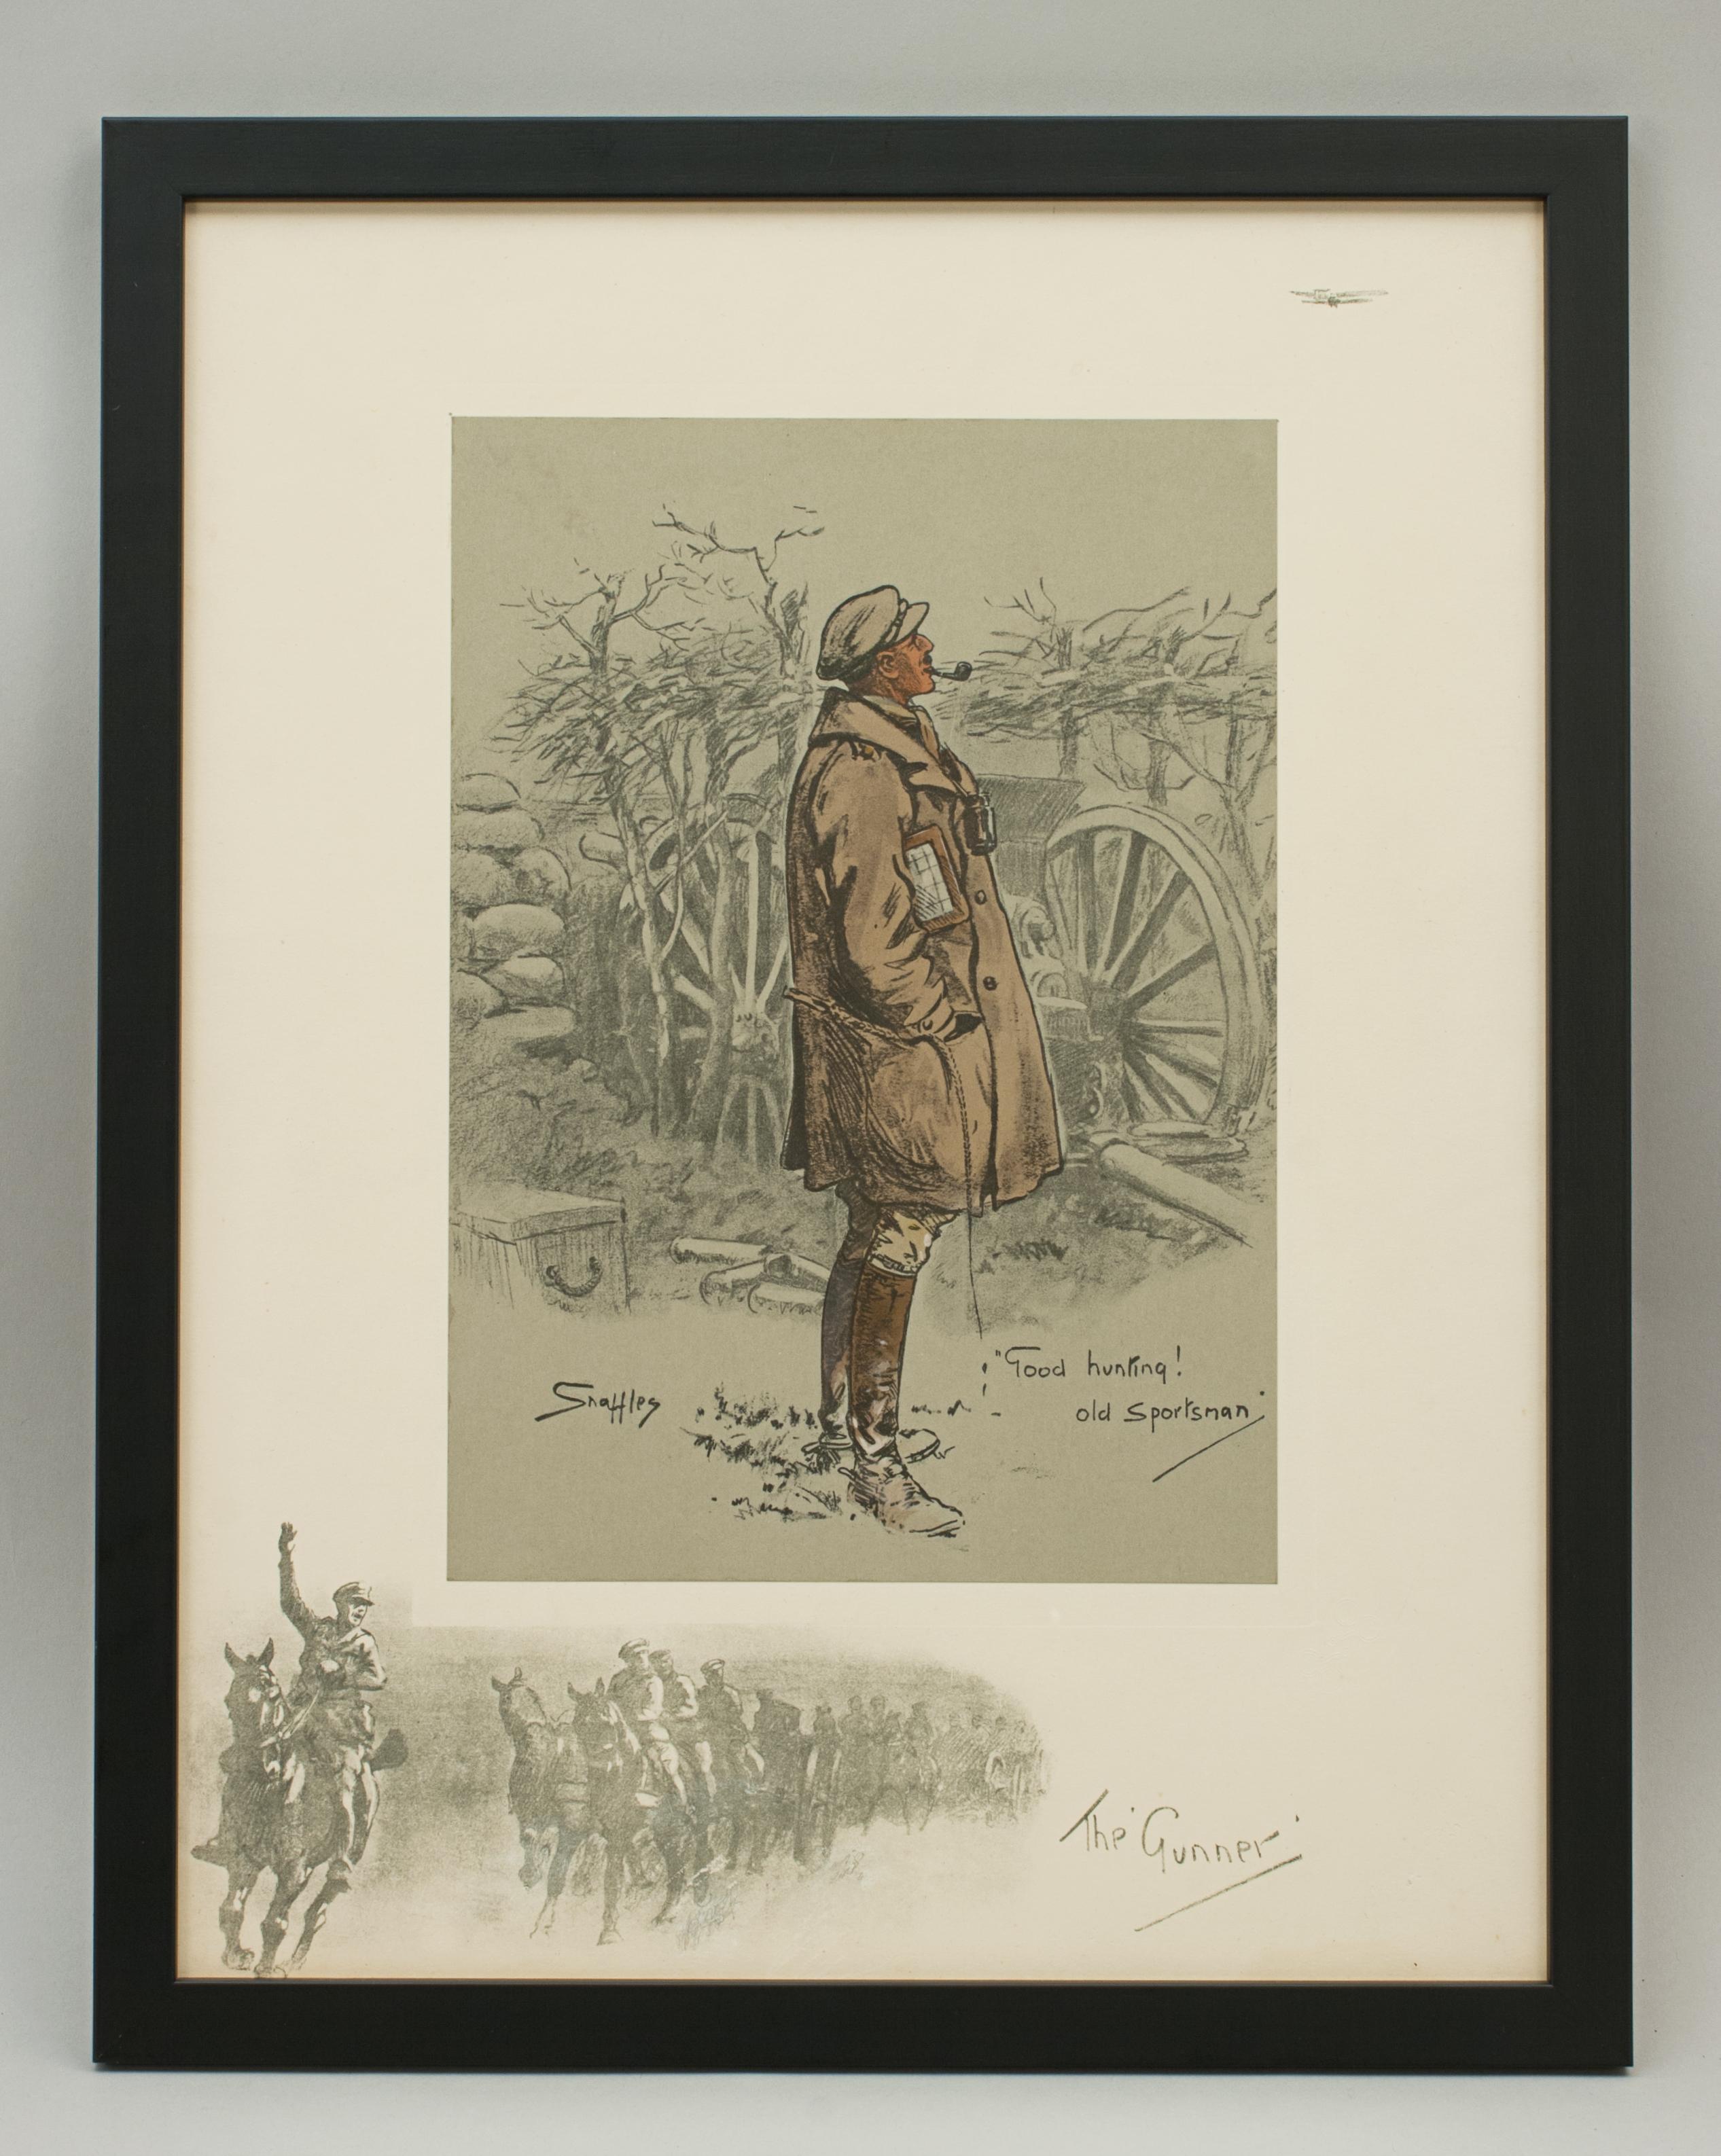 Snaffles WWI Military Print, The Gunner.
A good Snaffles WWI military print entitled 'The 'Gunner'. It is a hand coloured lithograph and shows the Gunner looking up at a passing plane (it is a remaque in the top right corner) with the caption 'Good